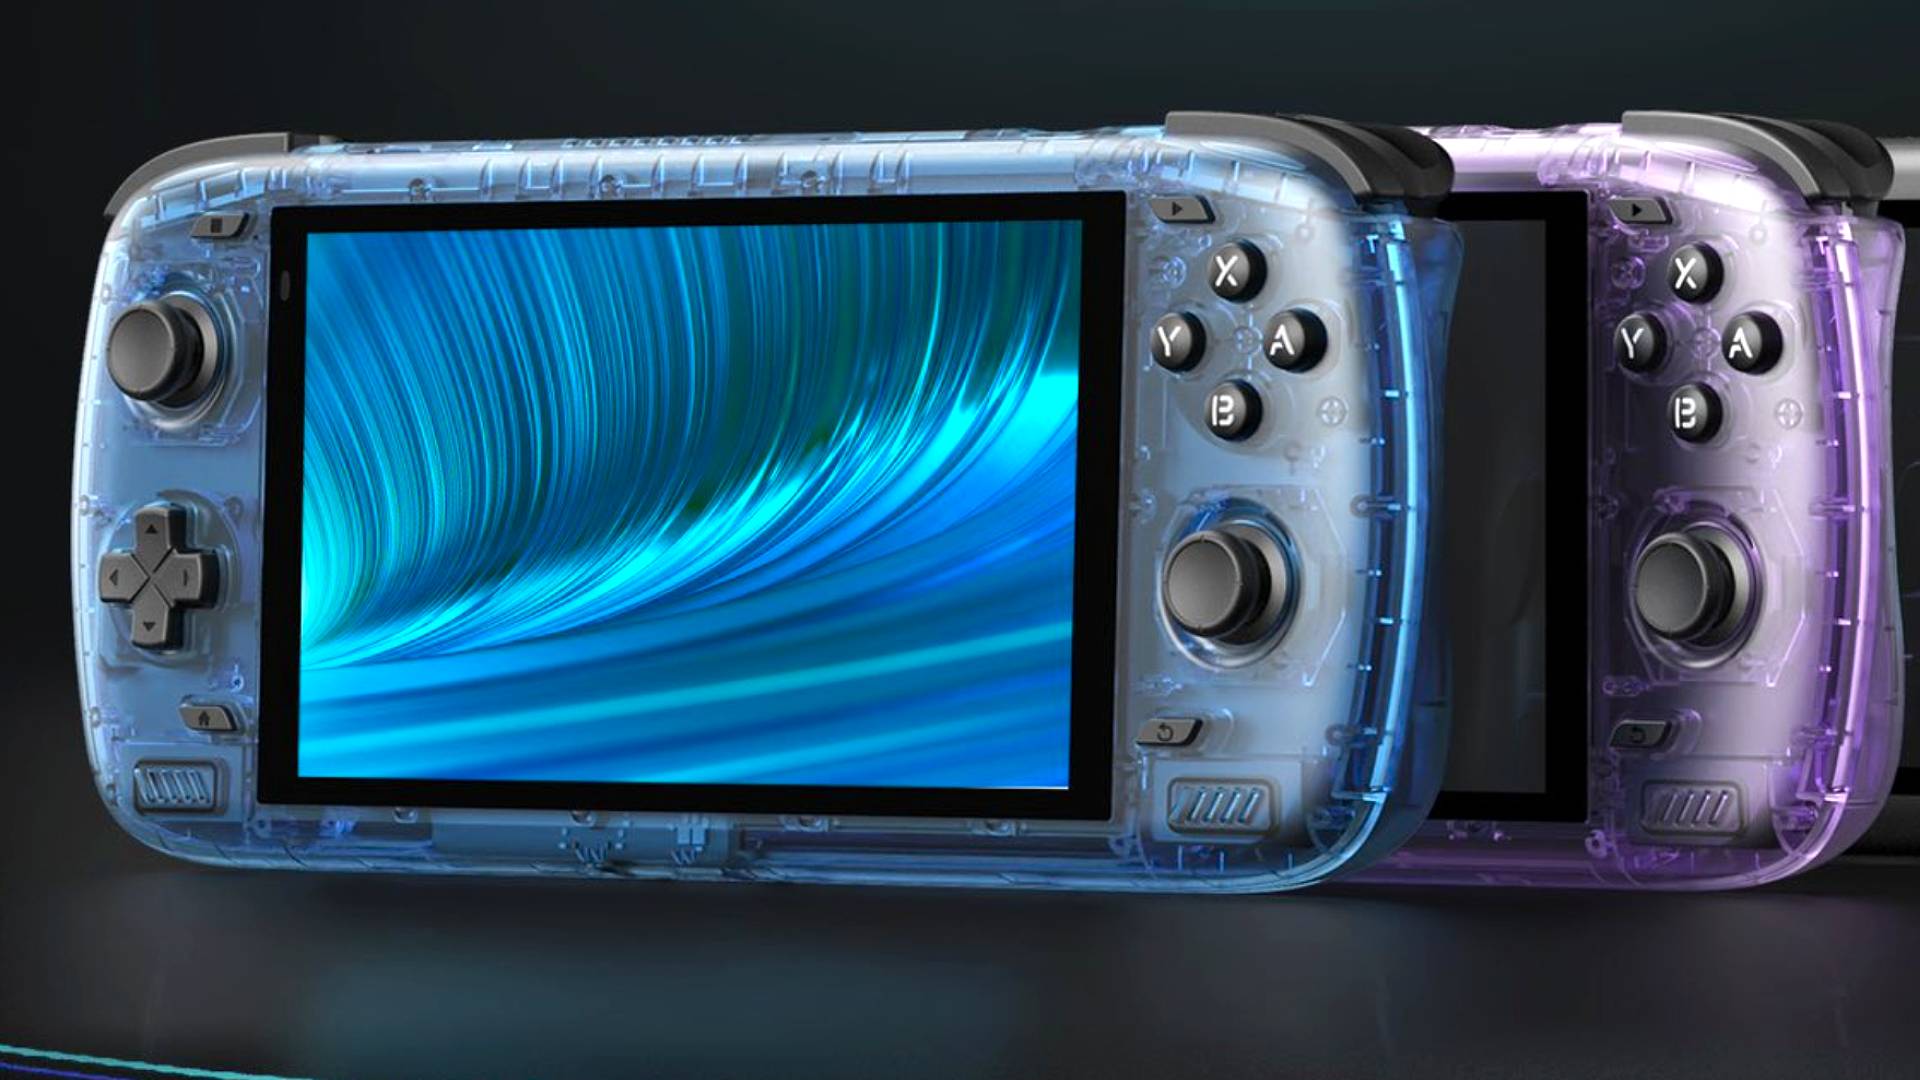 The Ayn Odin 2 is a powerful Android handheld with Game Boy color vibes,  and it's under $300